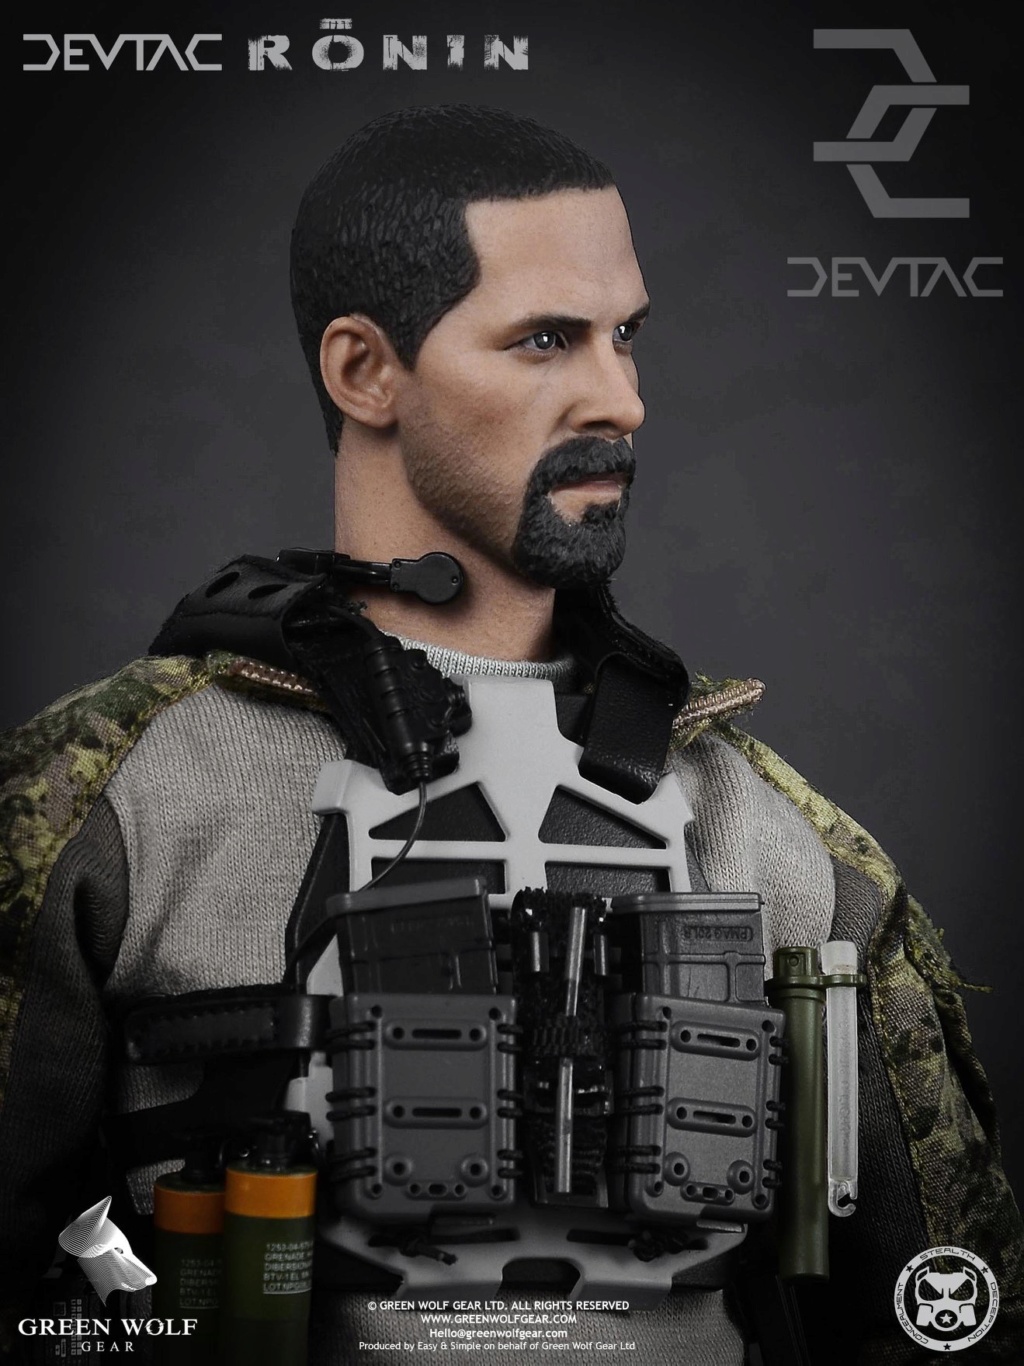 Ronin - NEW PRODUCT: Green Wolf Gear DEVTAC Ronin 1/6 Action Figure (VS2434P) 2223